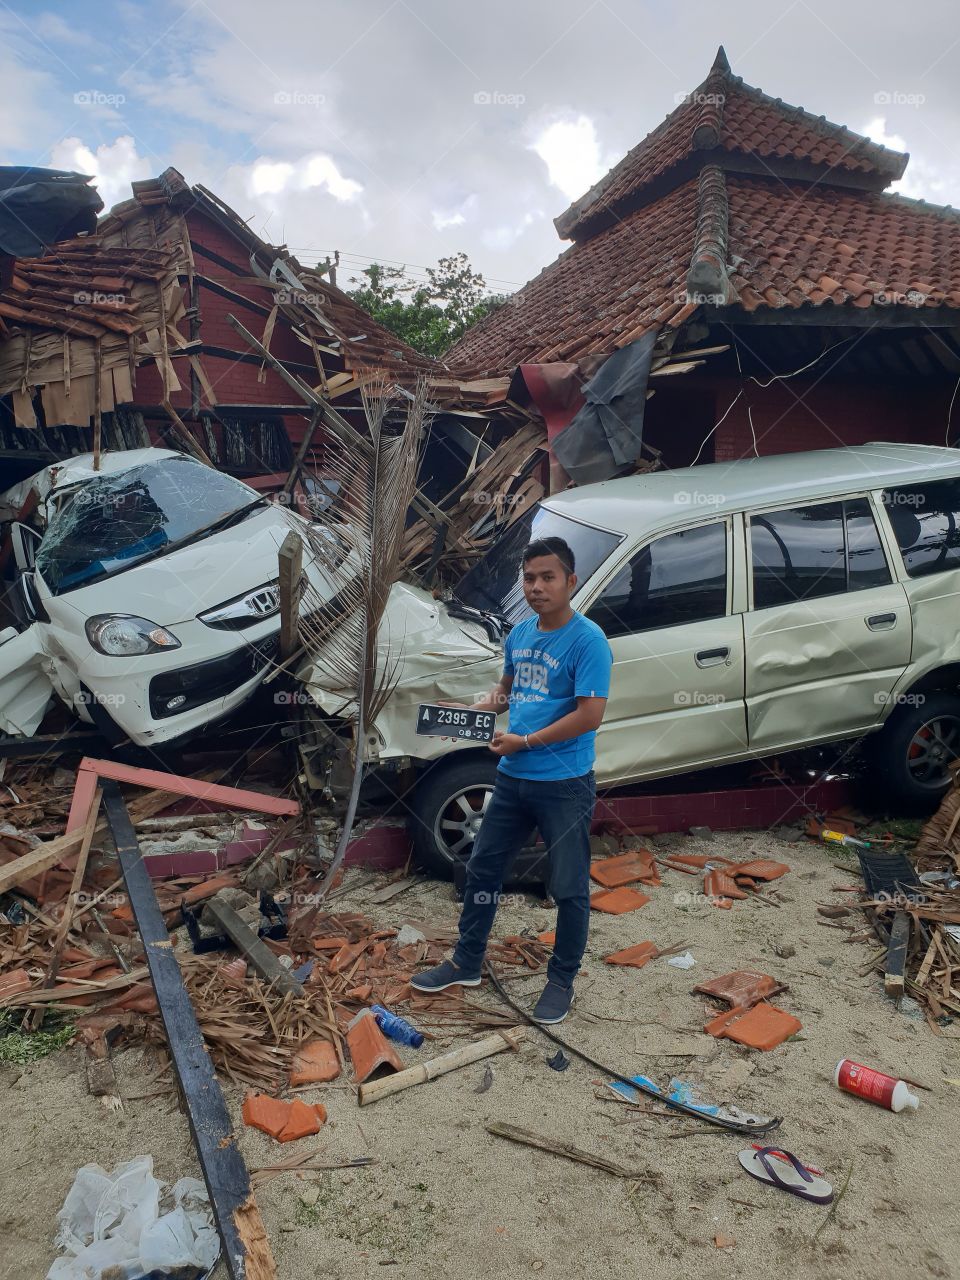 The tsunami tragedy Anyer Indonesia 23 desember 2018